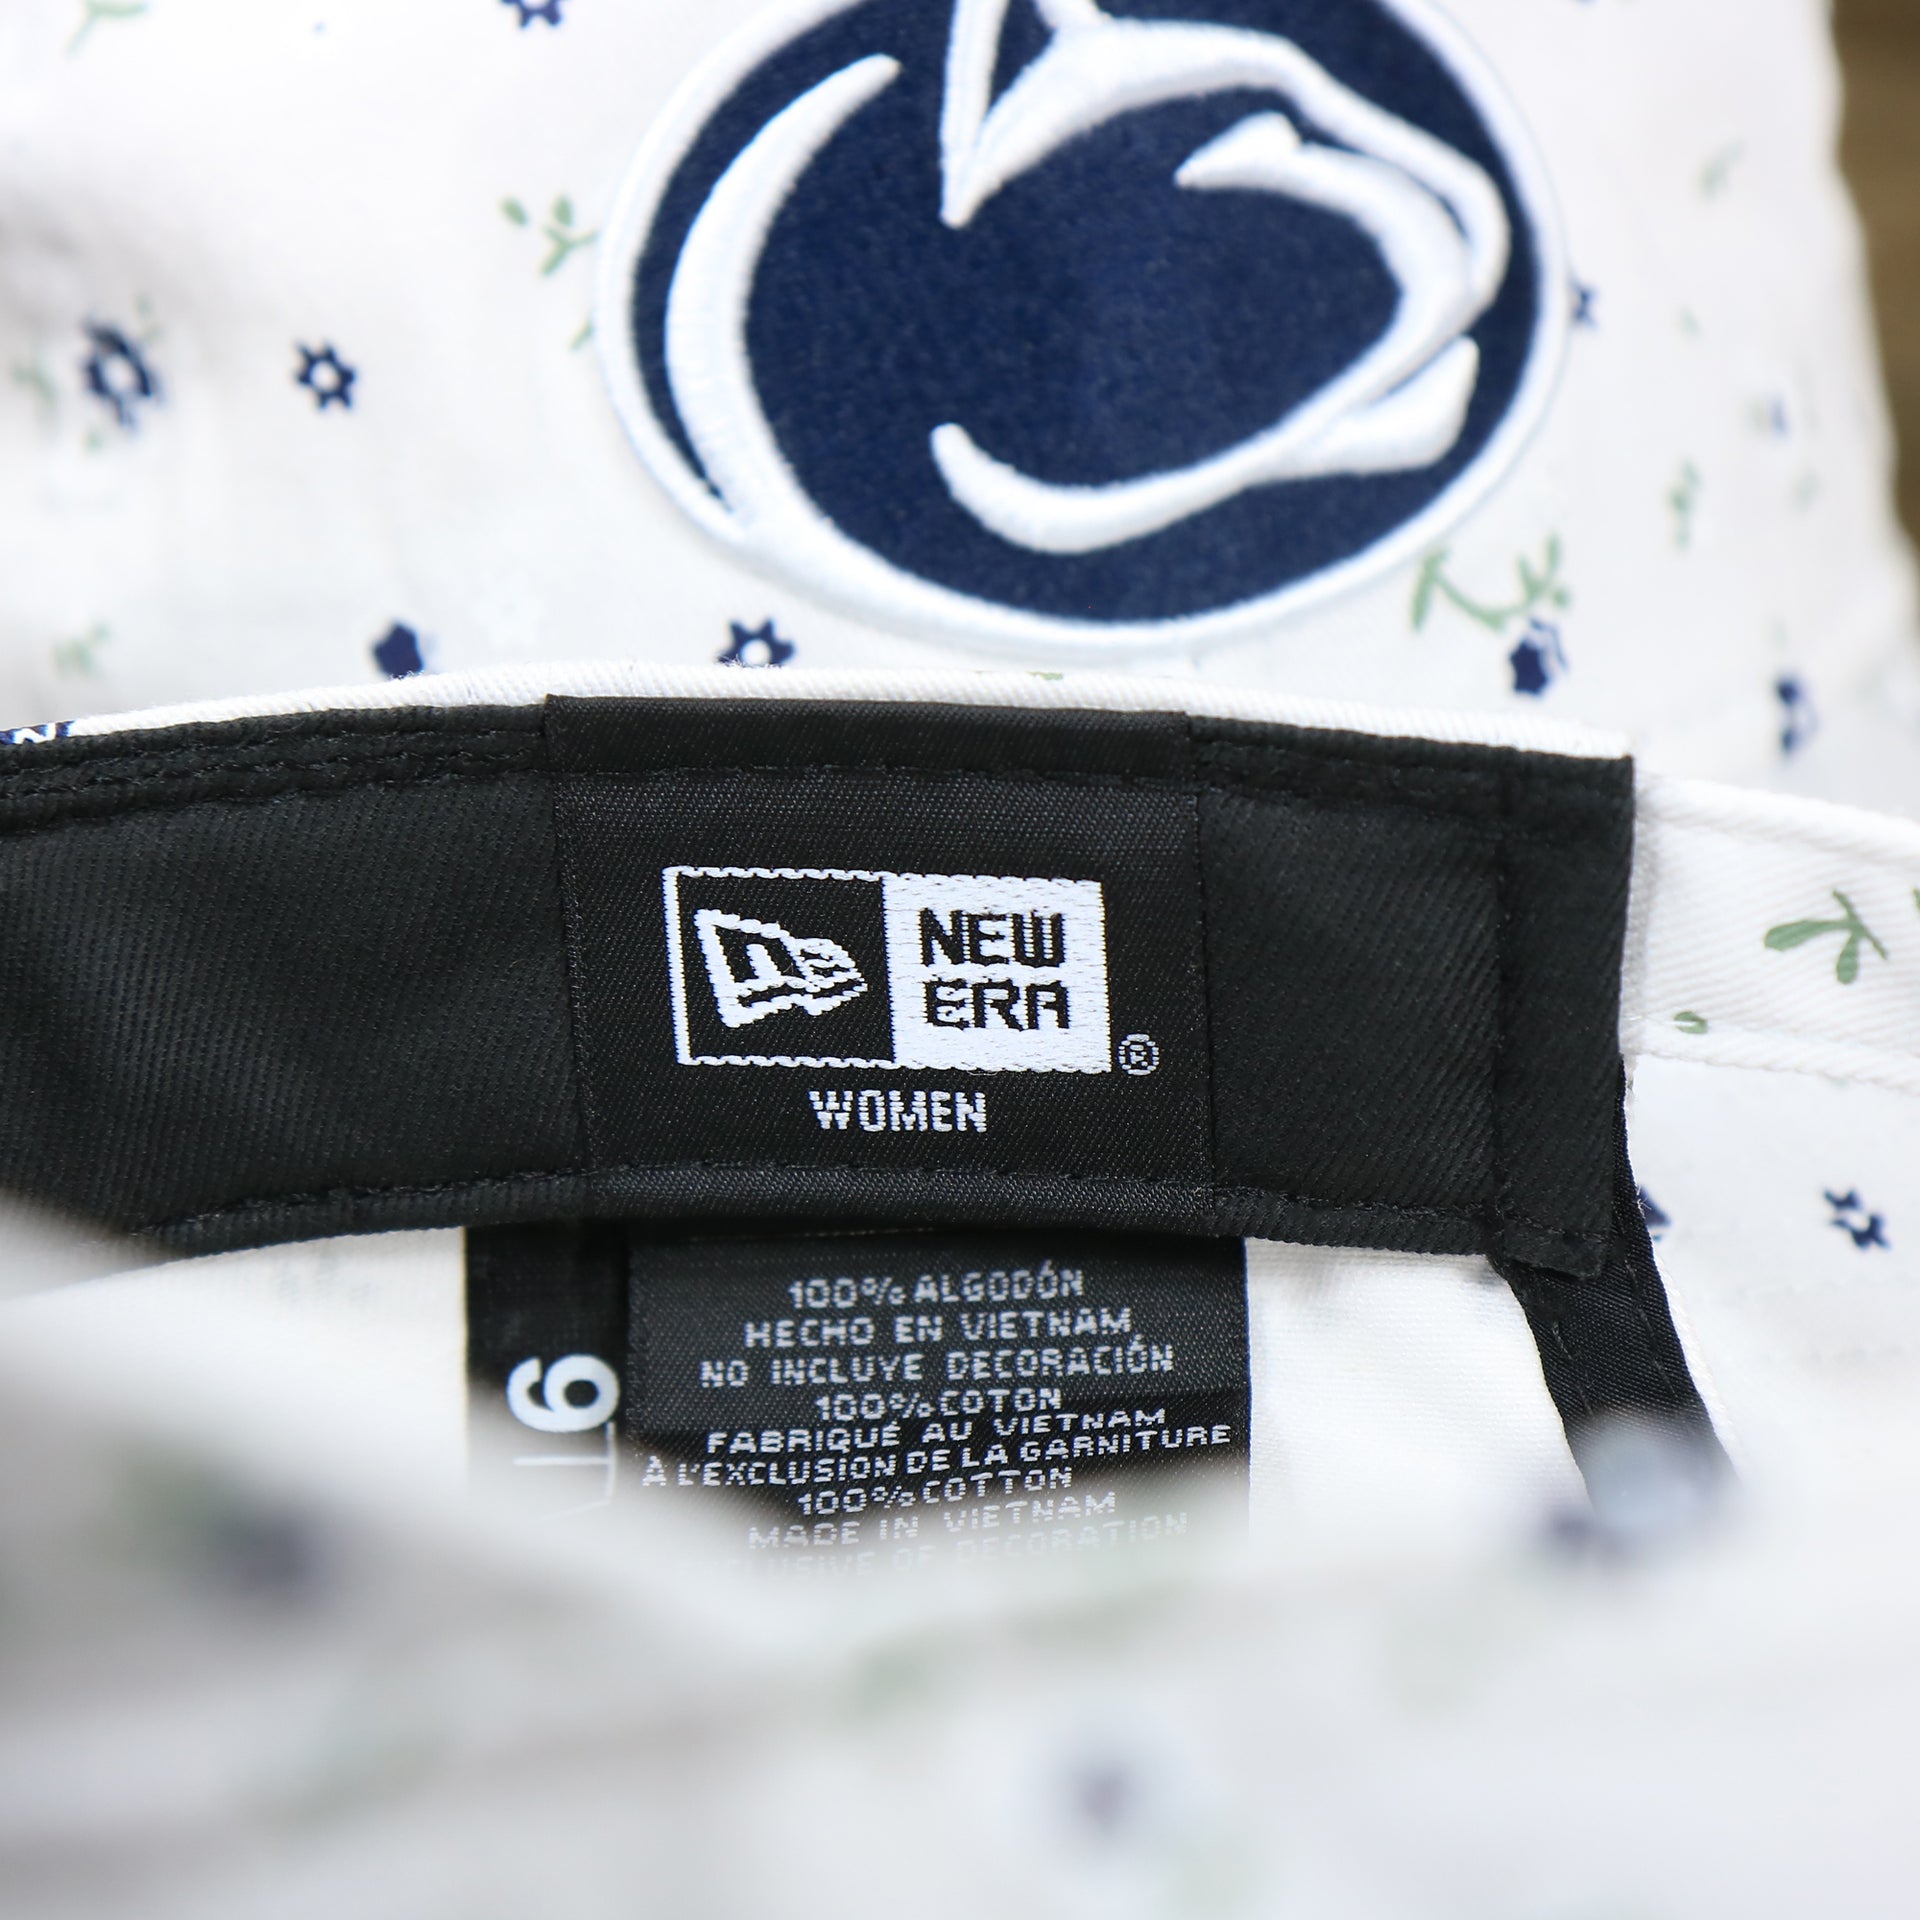 The New Era Women's Tag on the Women’s Penn State Nittany Lions All Over Micro Floral Print 9Twenty Dad hat | White 9Twenty Hat